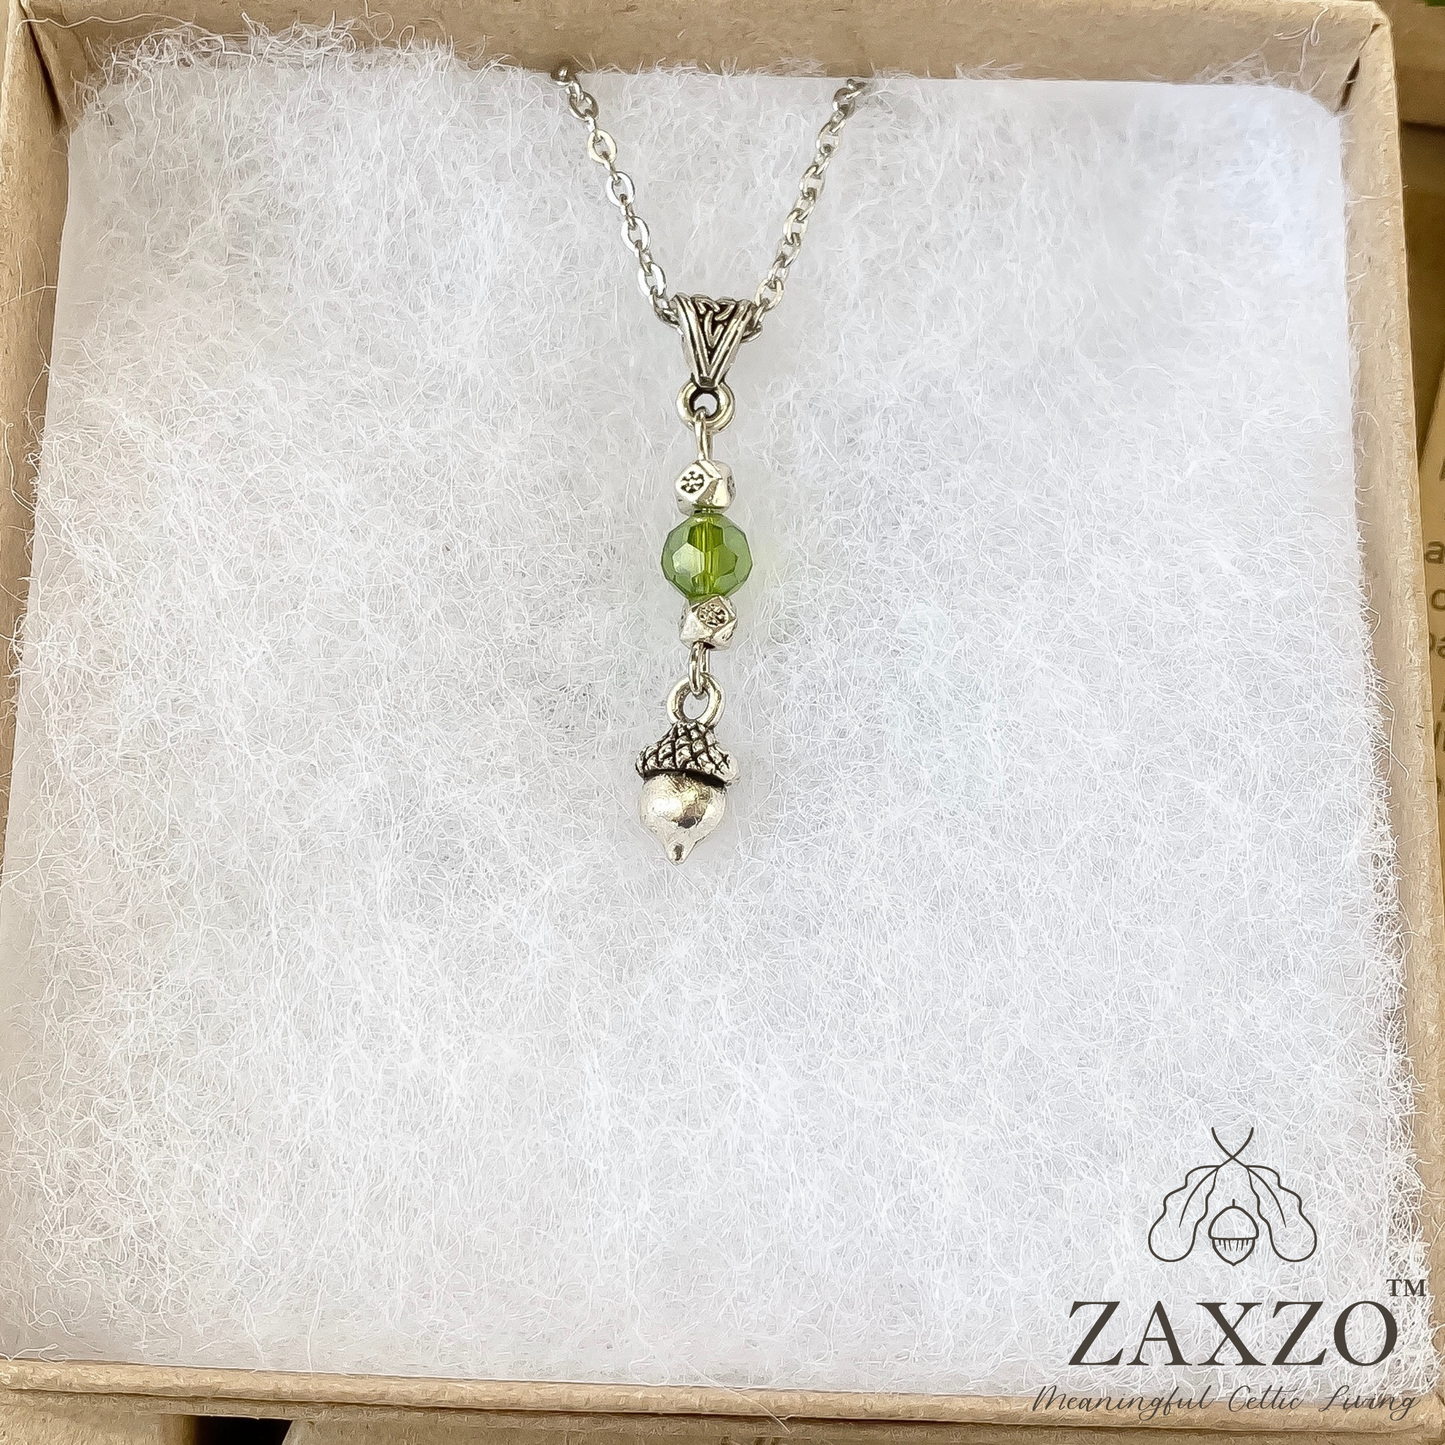 Dainty Acorn Charm Necklace with Faceted Czech Bead.